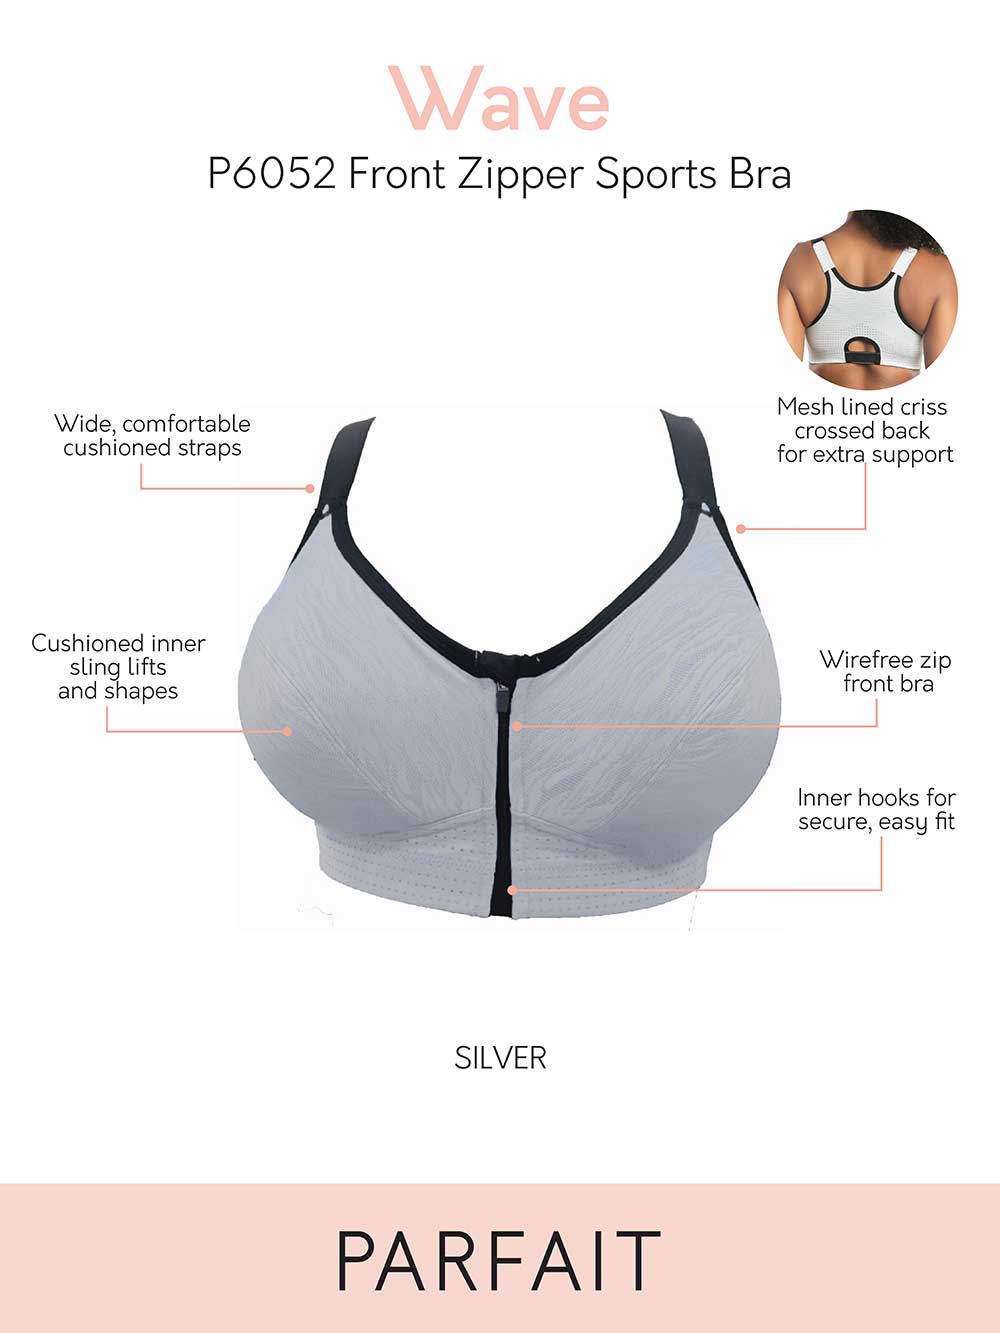 Lace Mesh Seamless Wirefree Front Zip Bra Light Lined Full